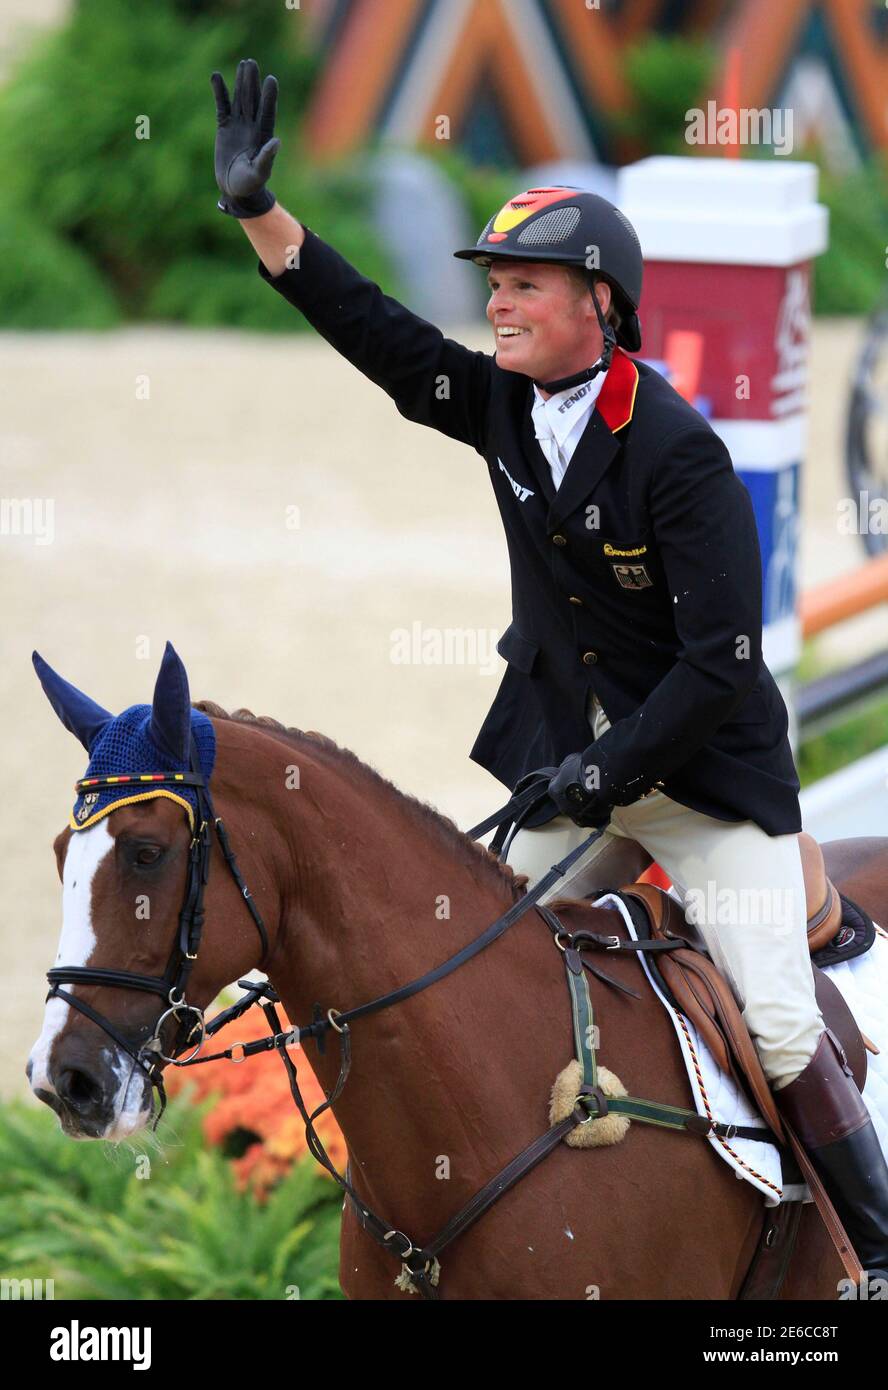 Frank Ostholt of Germany riding Mr. Medicott waves to the crowd after  competing in the show jumping phase of the Eventing World Championship at  the World Equestrian Games in Lexington, Kentucky, October